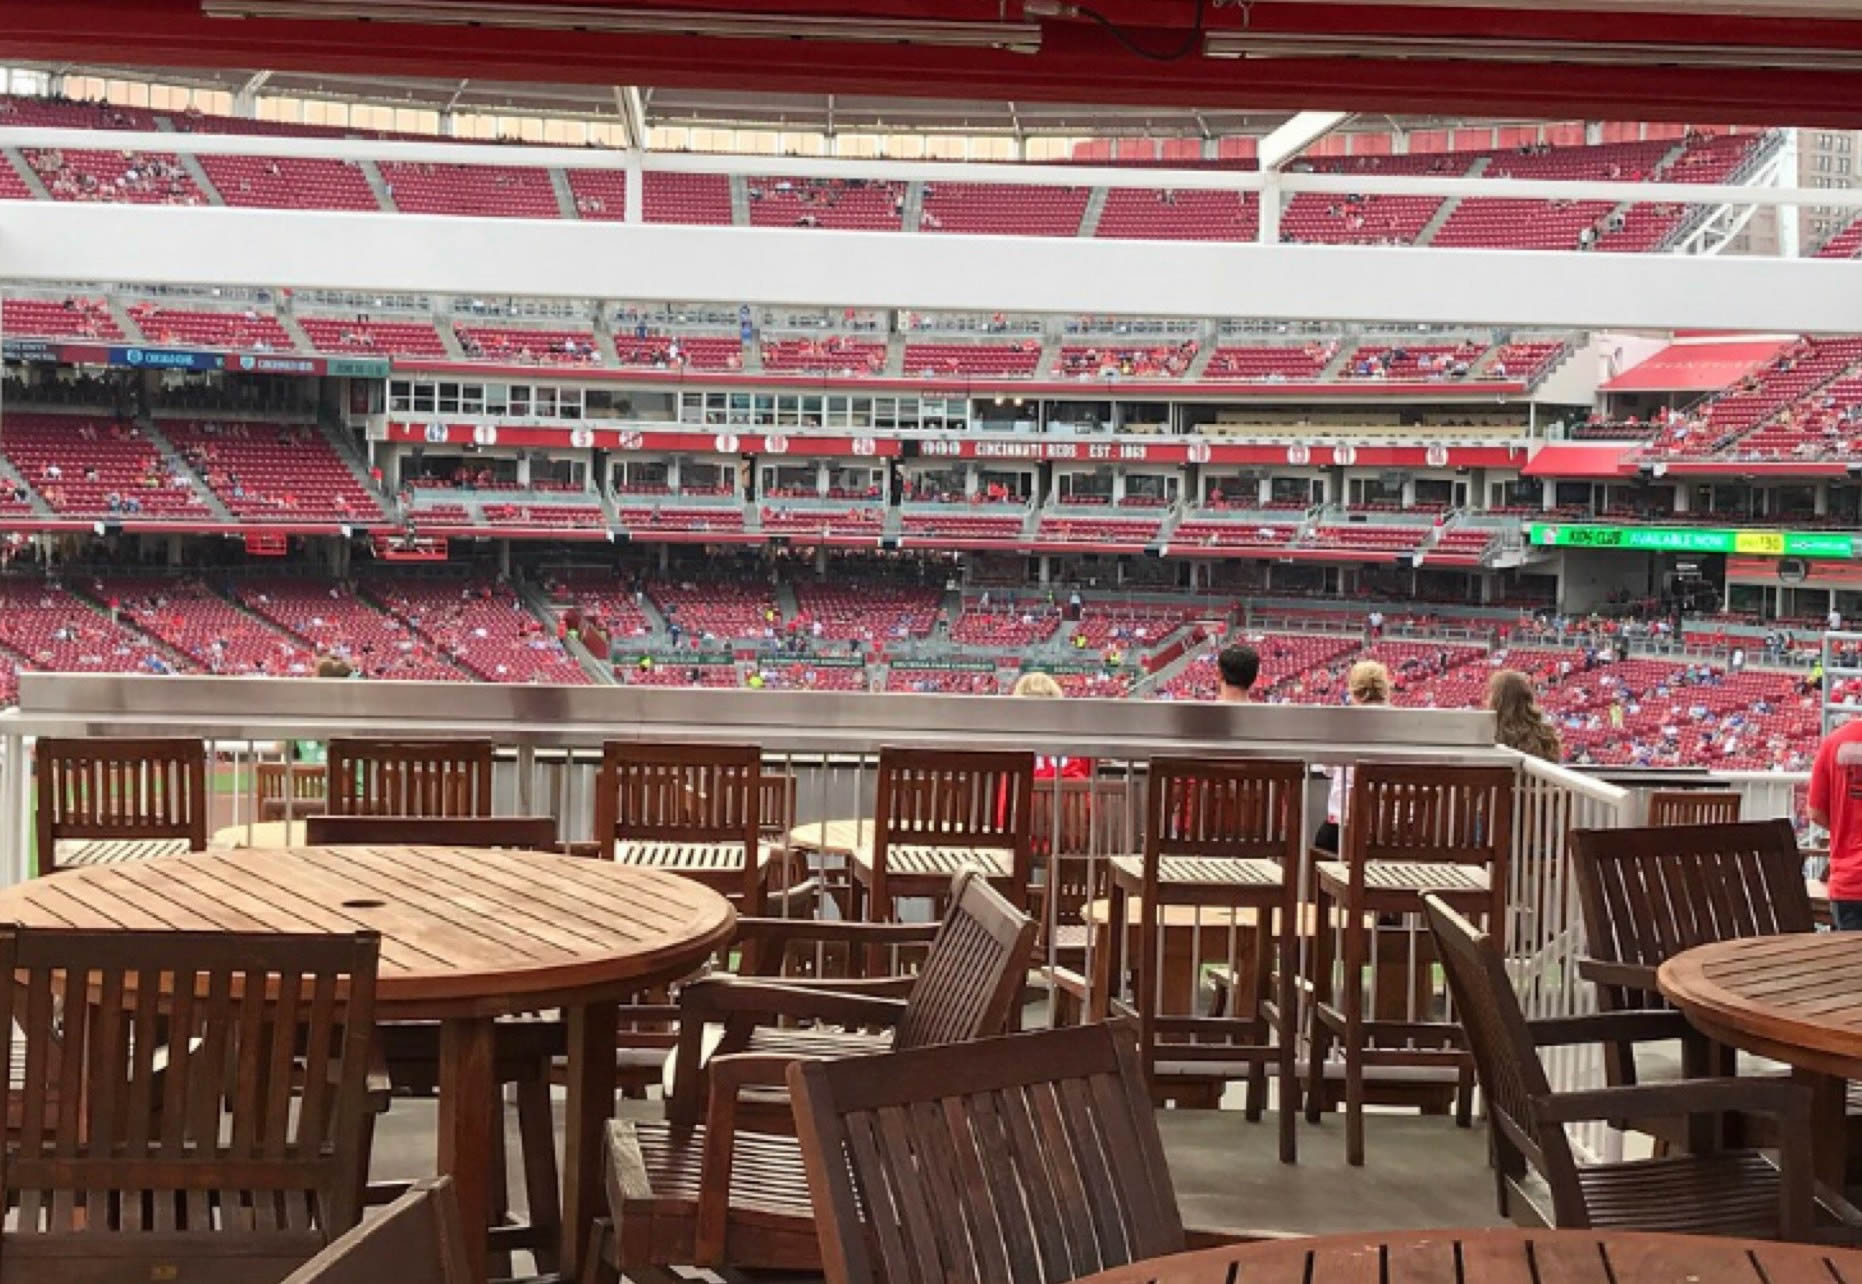 The best way to watch baseball: Reds stadium views – The Purple Quill